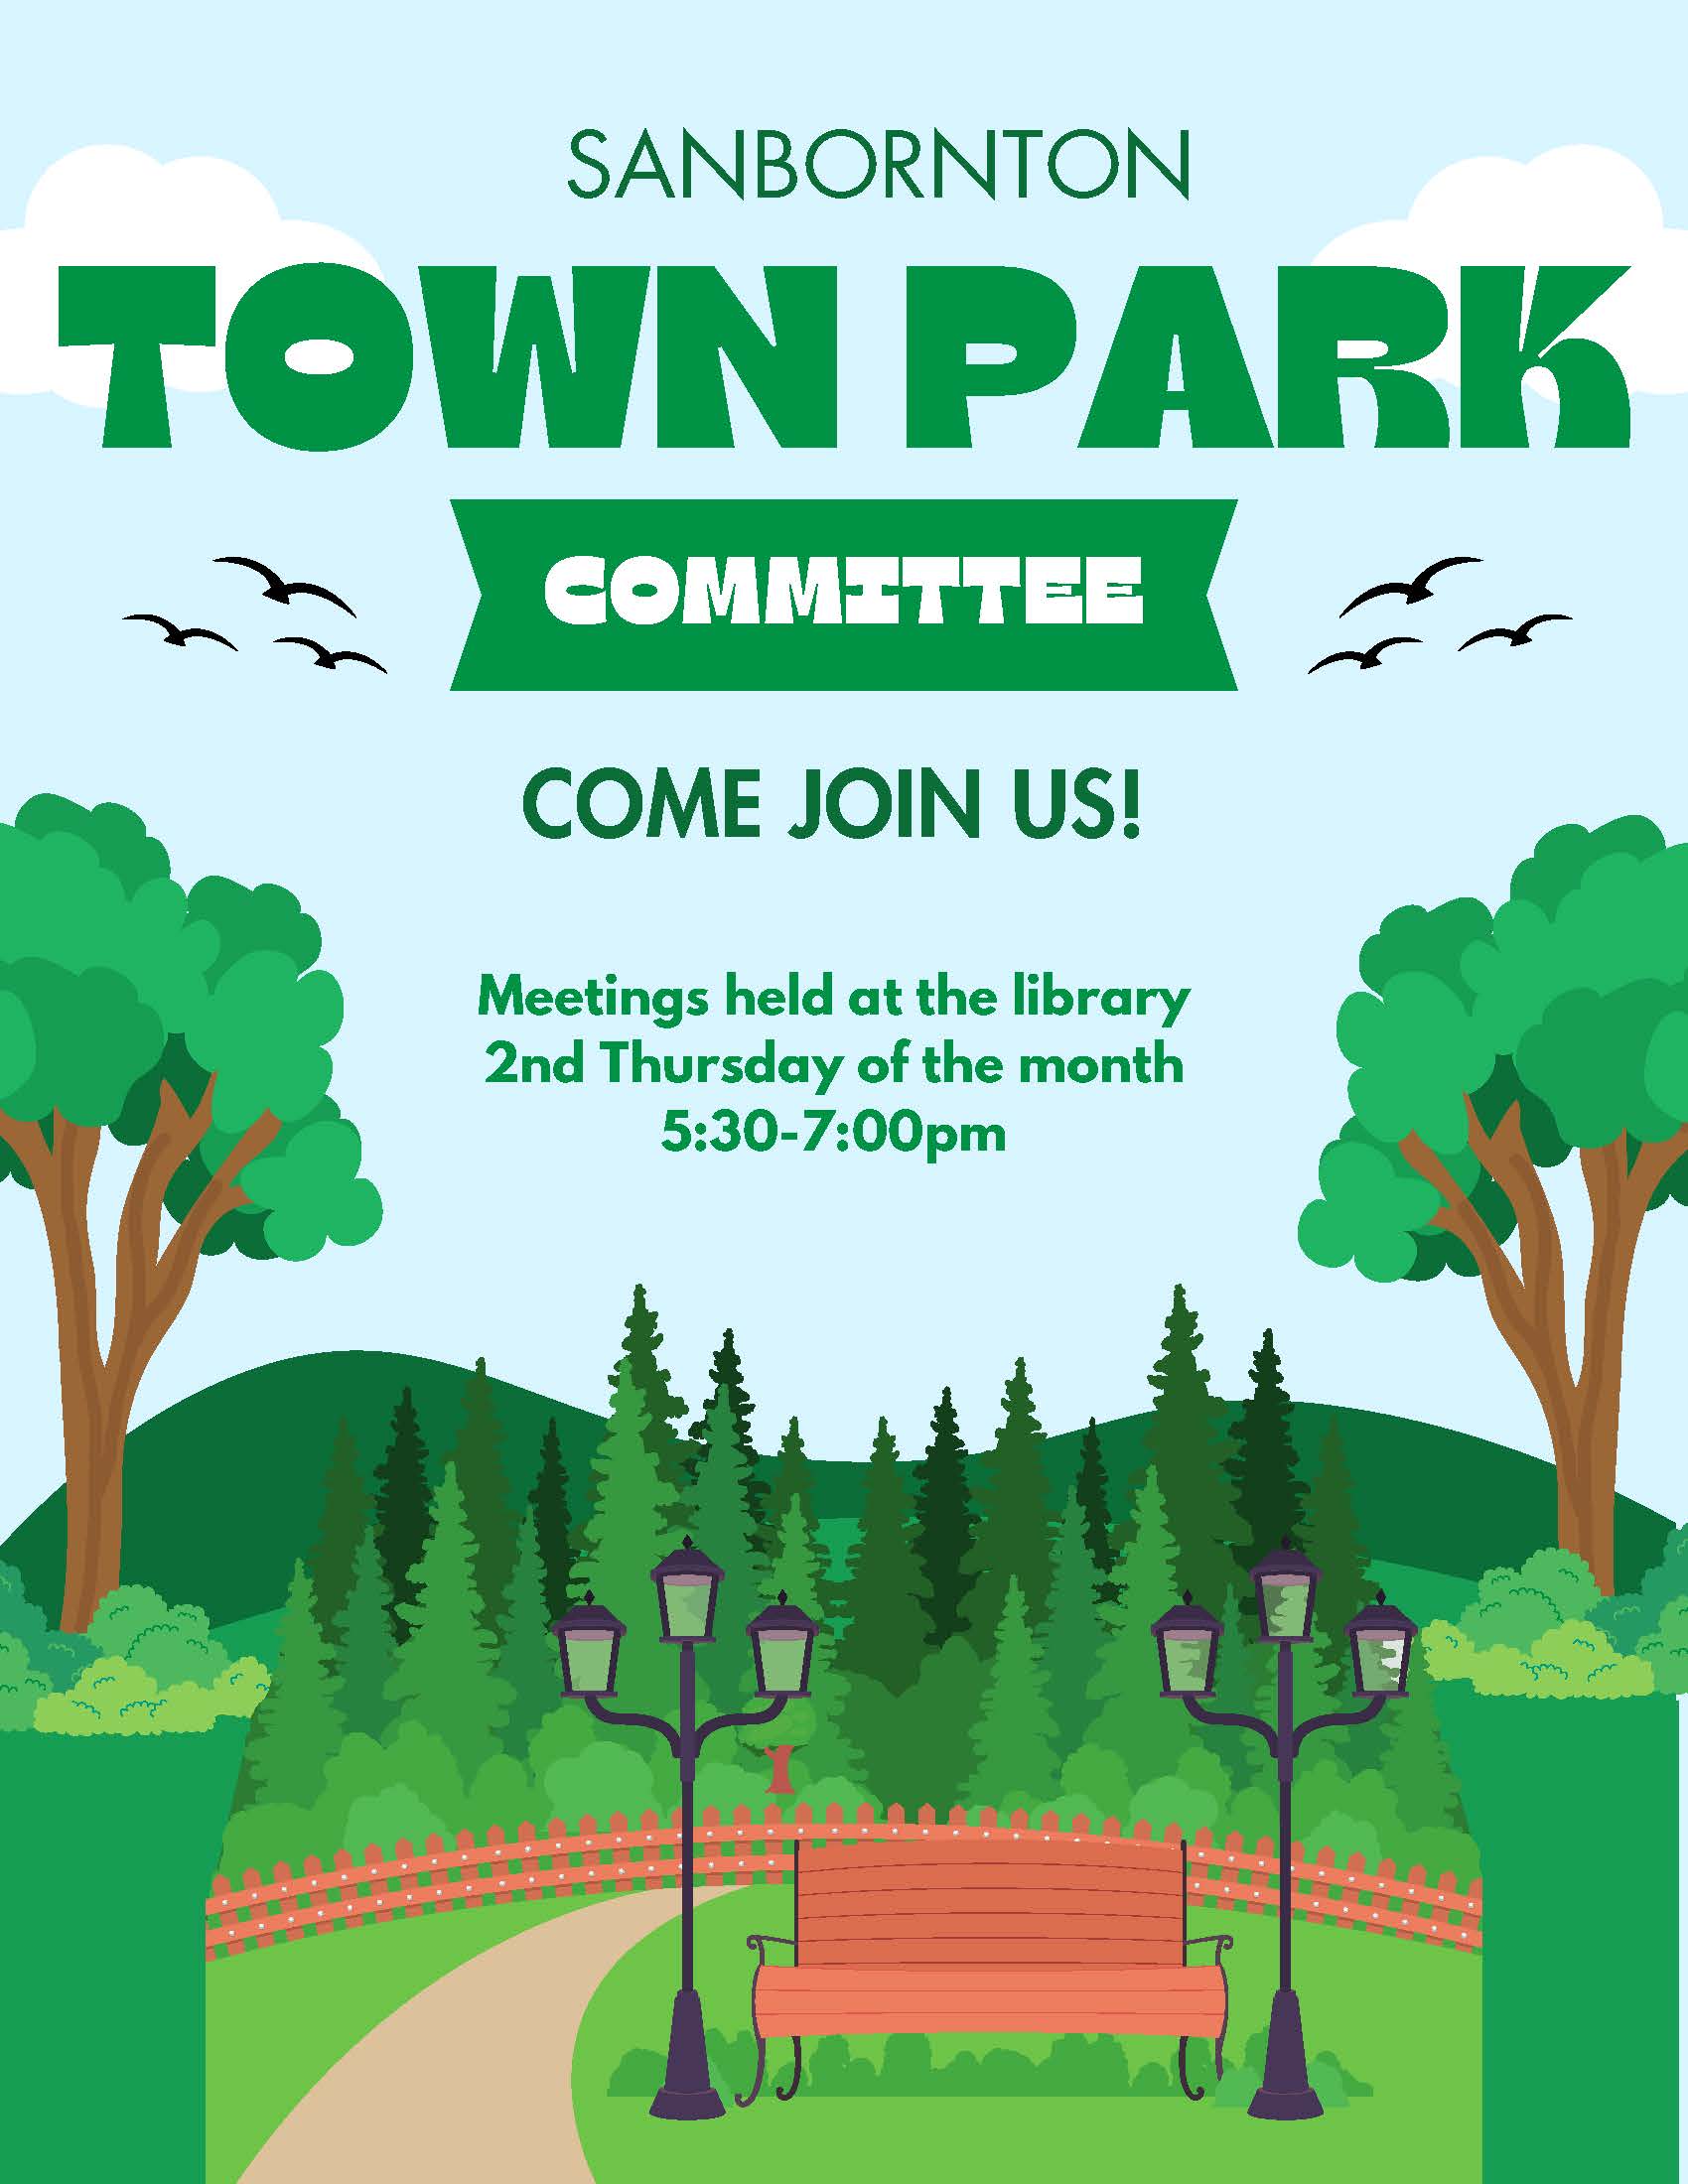 TOwn Park Committee